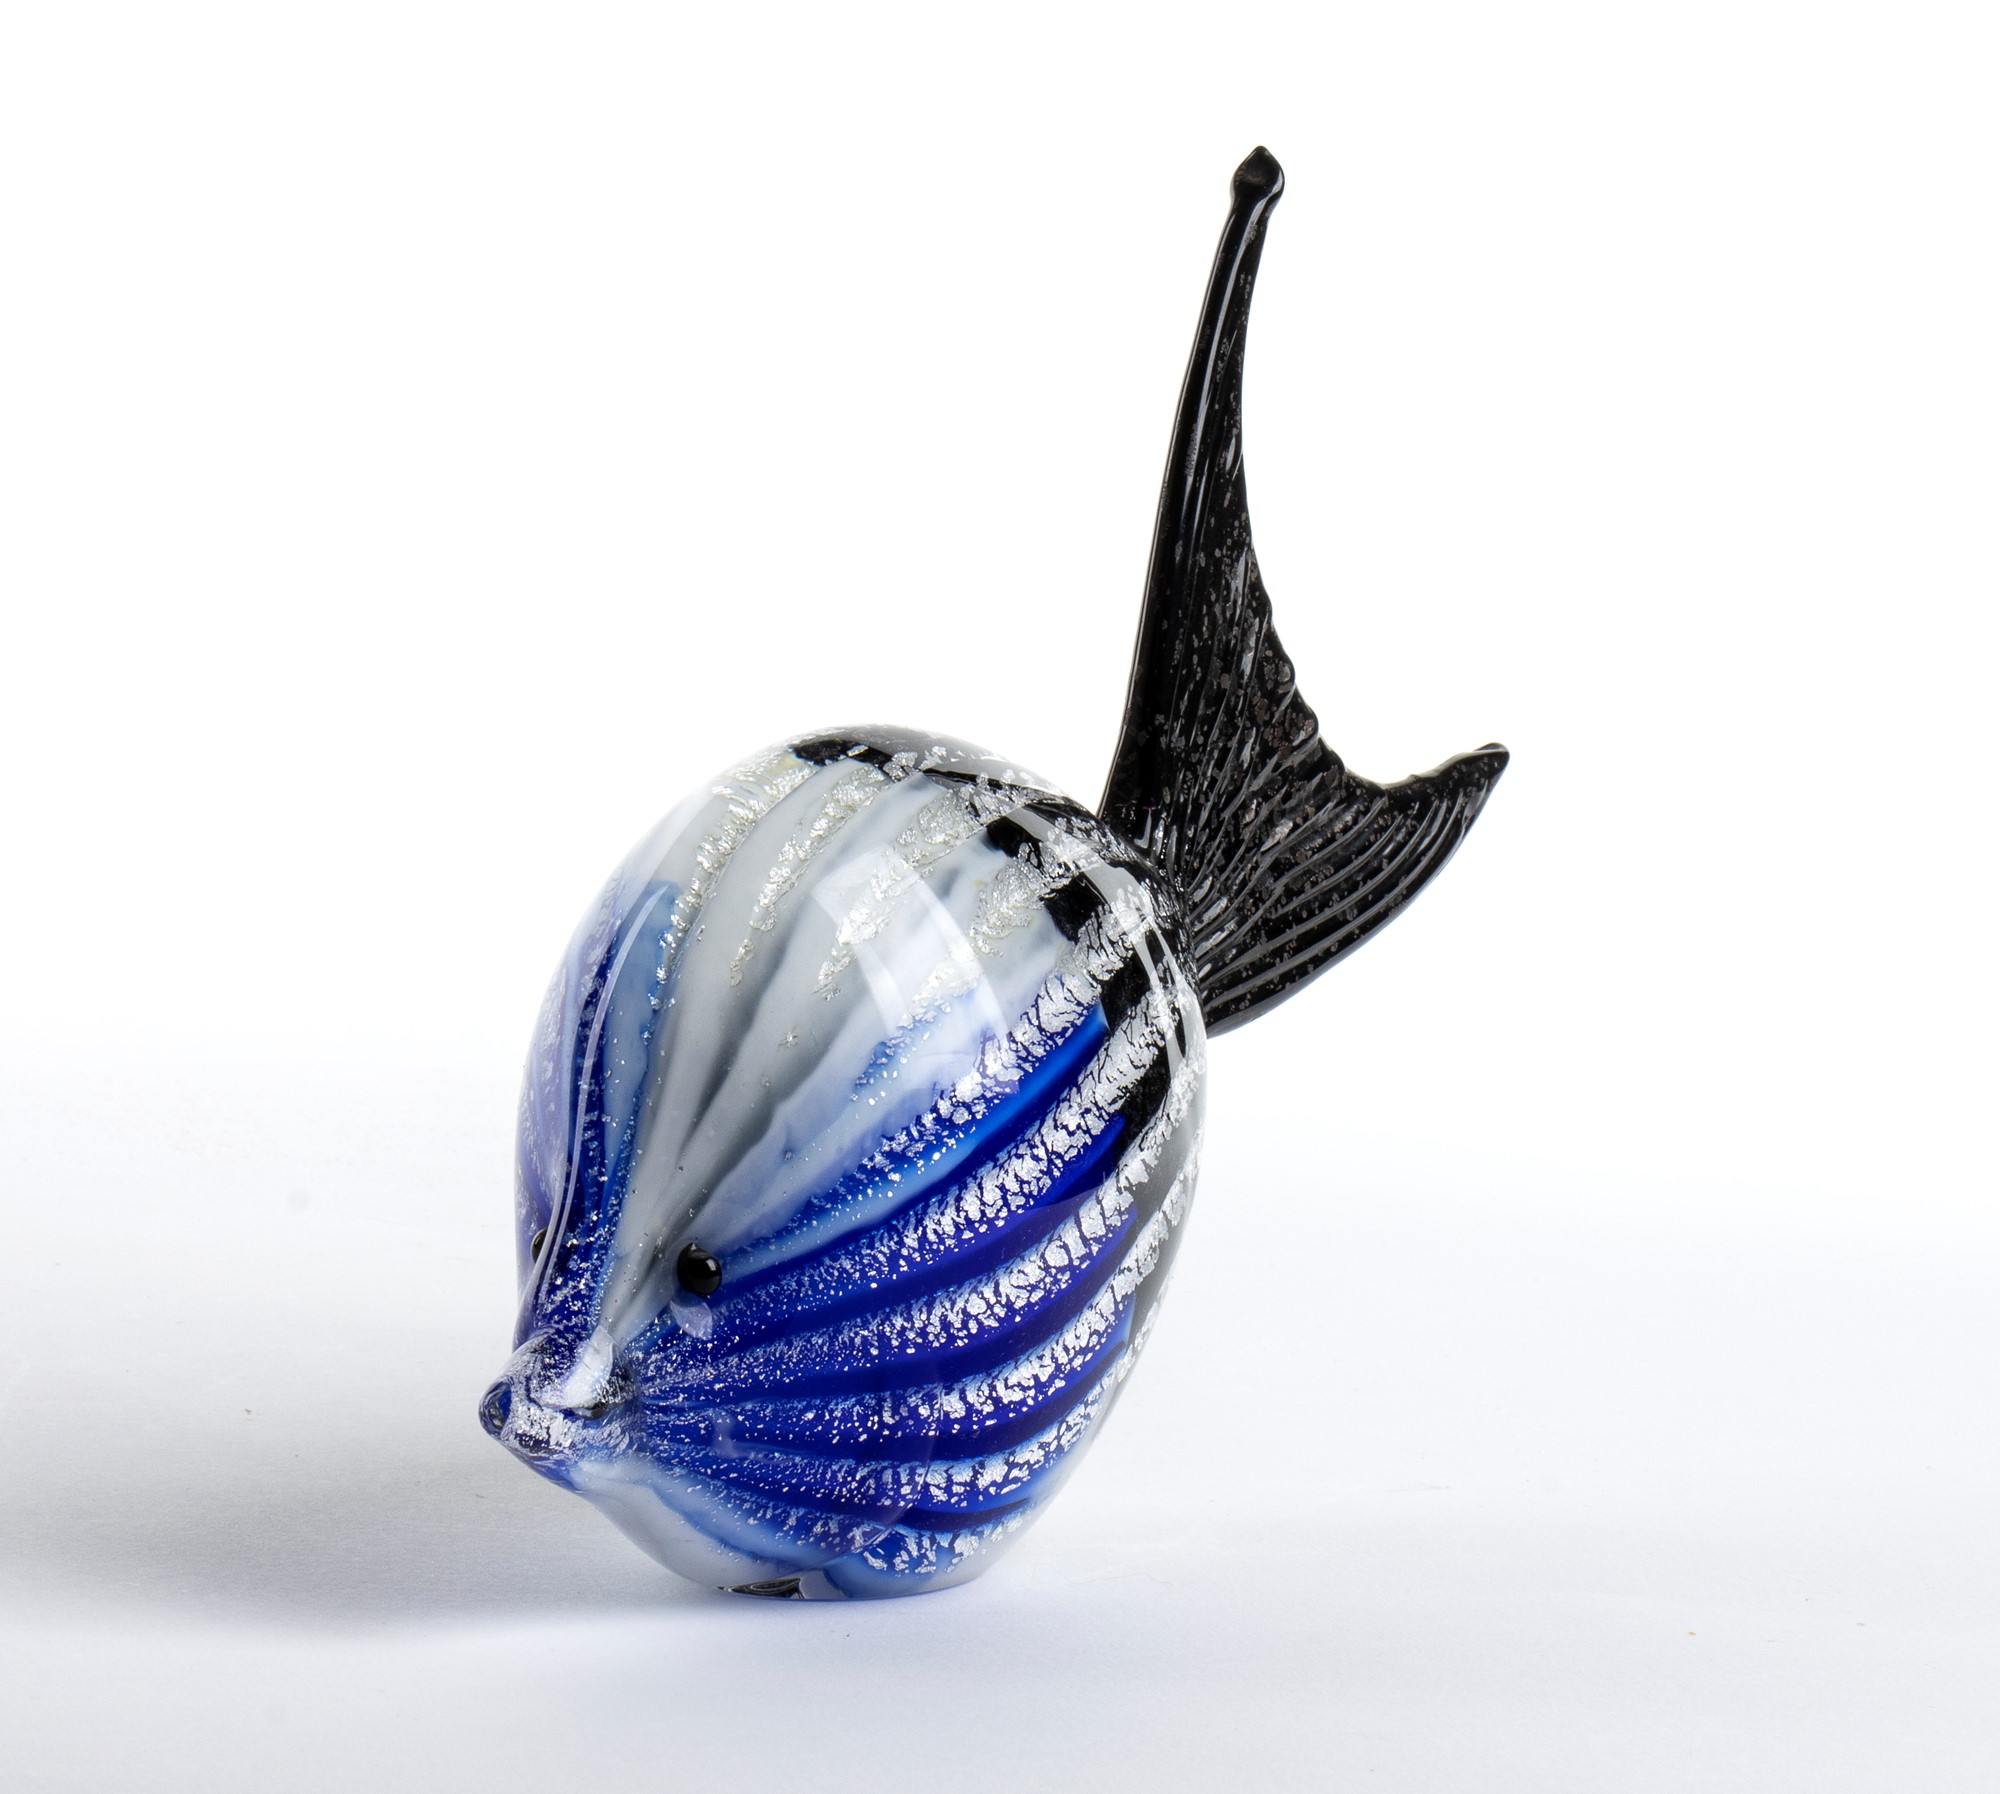 Small fish-shaped sculpture in Murano glass - Image 7 of 11